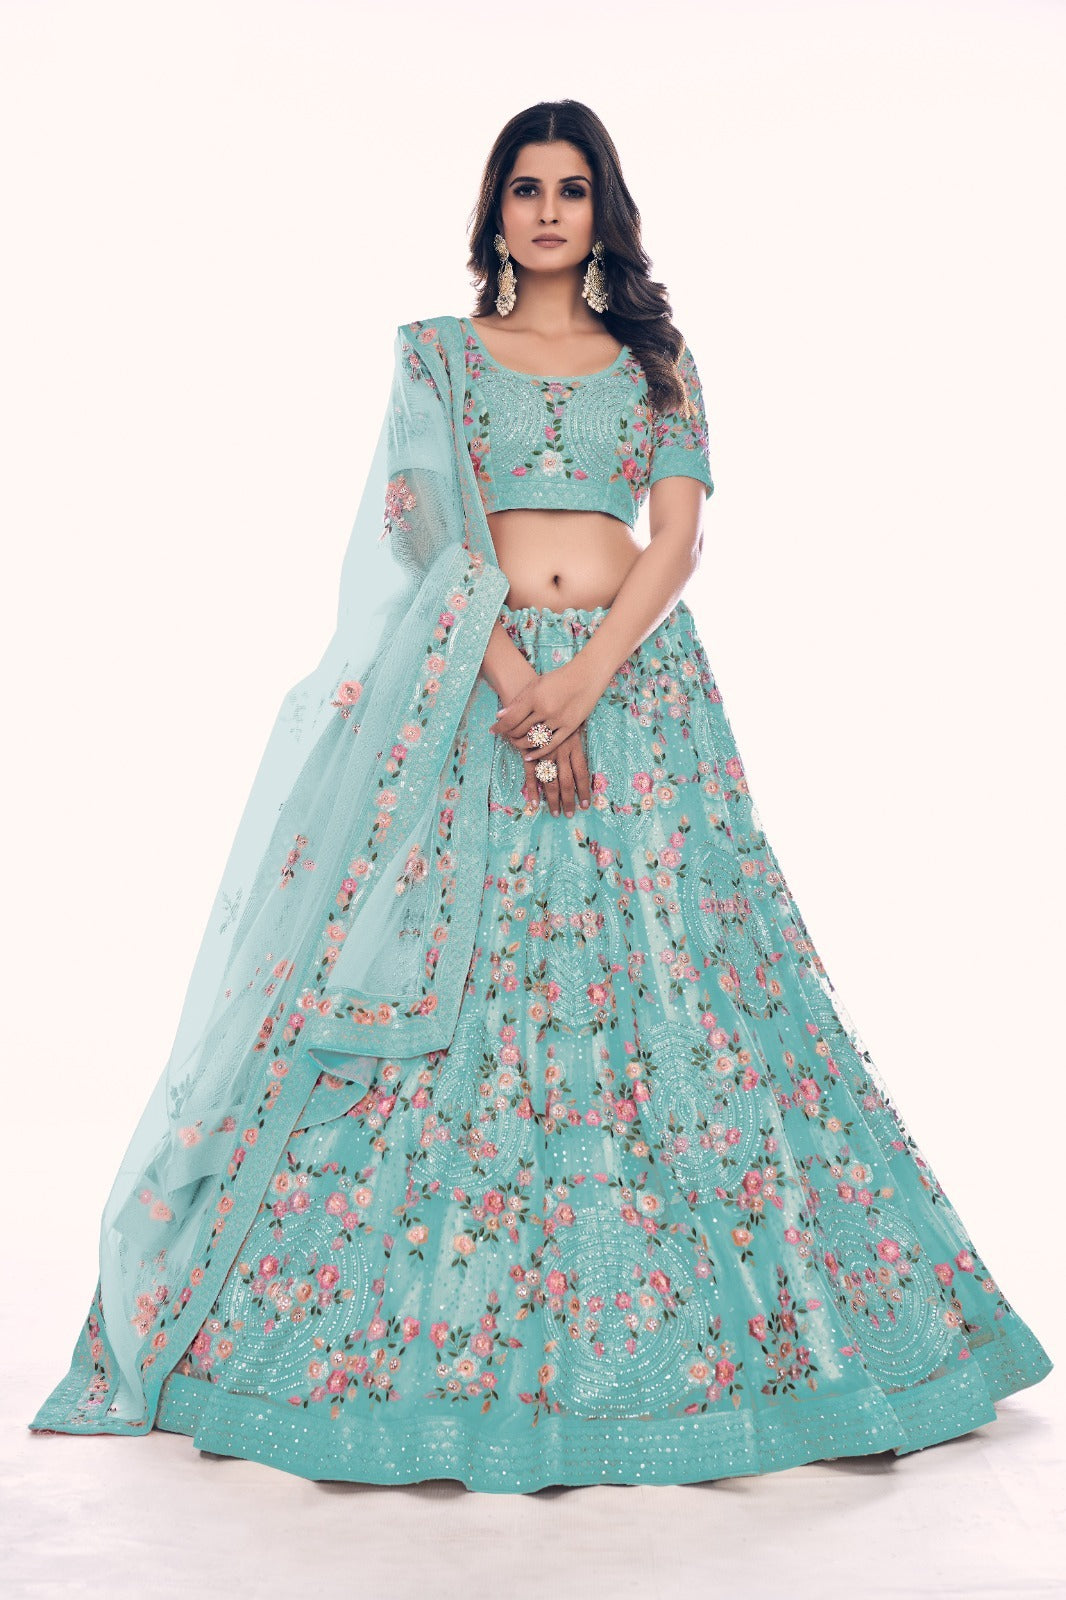 Red Stunning Work Lehenga Choli For Dulhan at Rs.17550/Piece in betul offer  by Shree shyam vastra bhandar